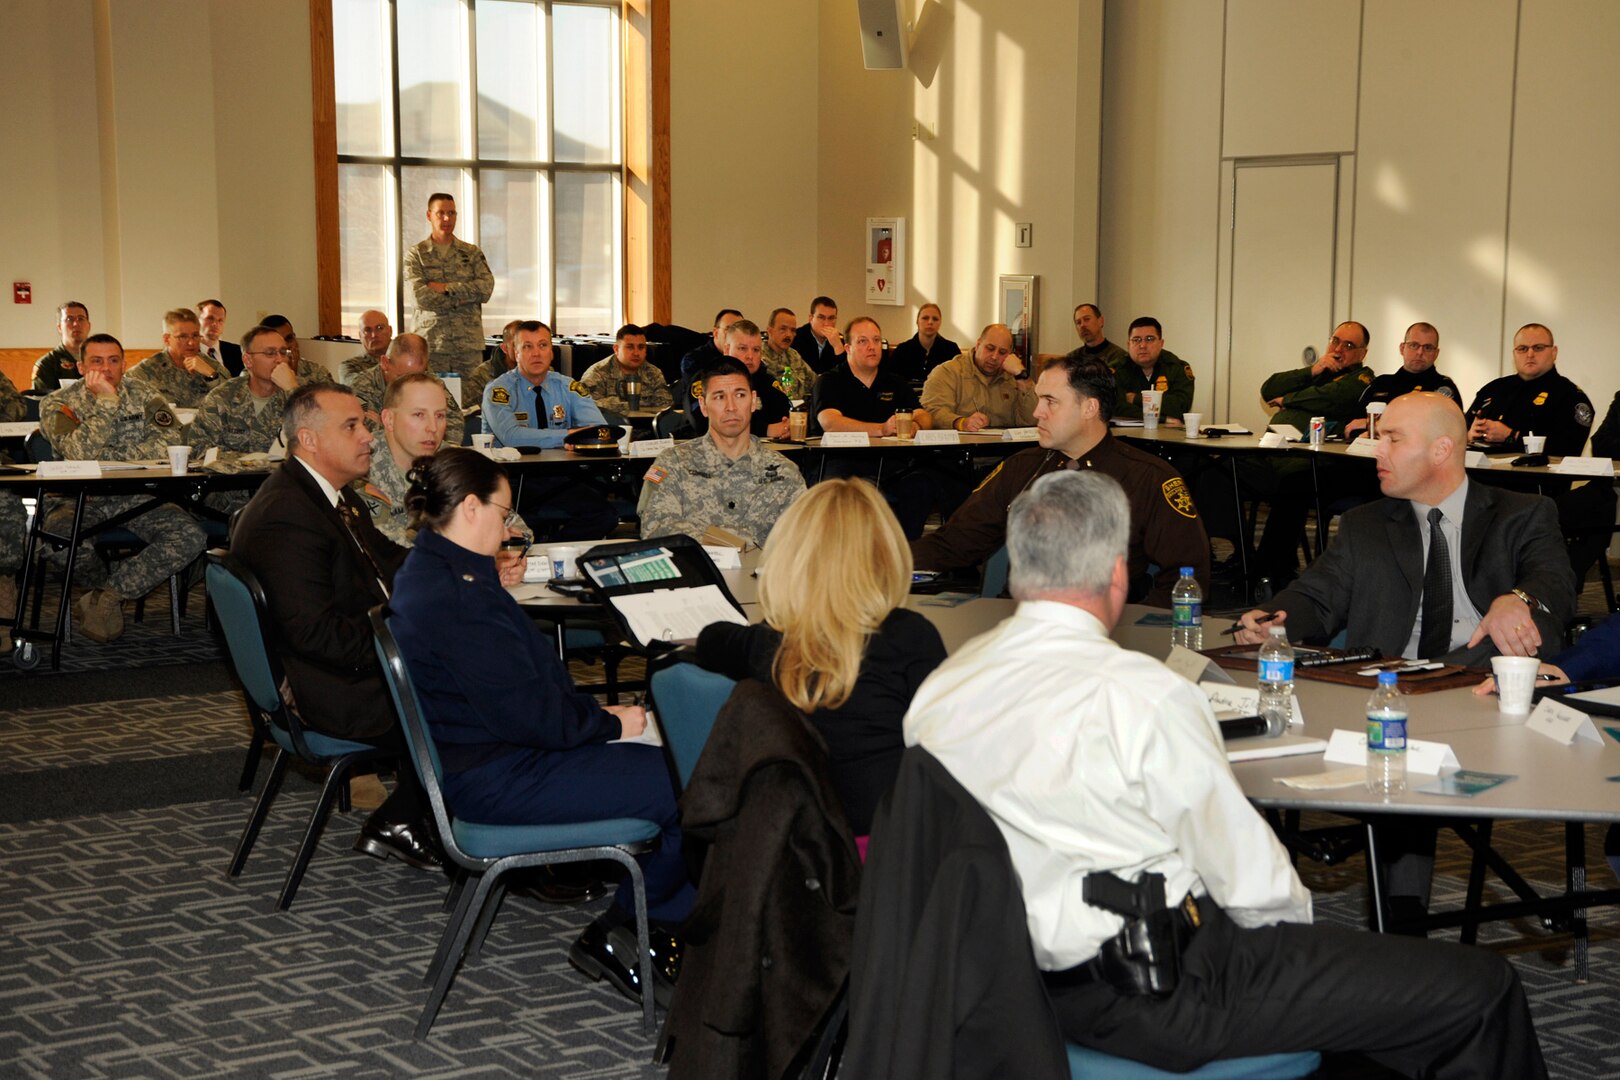 More than 20 law enforcement agencies trekked to The Michigan National Guard's 127th Wing Feb. 9, 2012, as the FBI held a field office visit and table top exercise designed to guide actions that would be utilized during an actual weapons of mass destruction contingency response in the Detroit area. Several Michigan National Guard entities were present, including the 51st Civil Support Team, many members of the 127th Wing's first responders and Mission Support Group, and representatives from the state Emergency Operations Center. Also present were representatives from the U.S. Attorney's Office, Dearborn Police Department, Customs and Border Protection, the Coast
Guard's Sector Detroit Enforcement Division, the Drug Enforcement
Administration, Detroit Police Department, and the Macomb County Sheriff's office, as well as the Detroit FBI office.